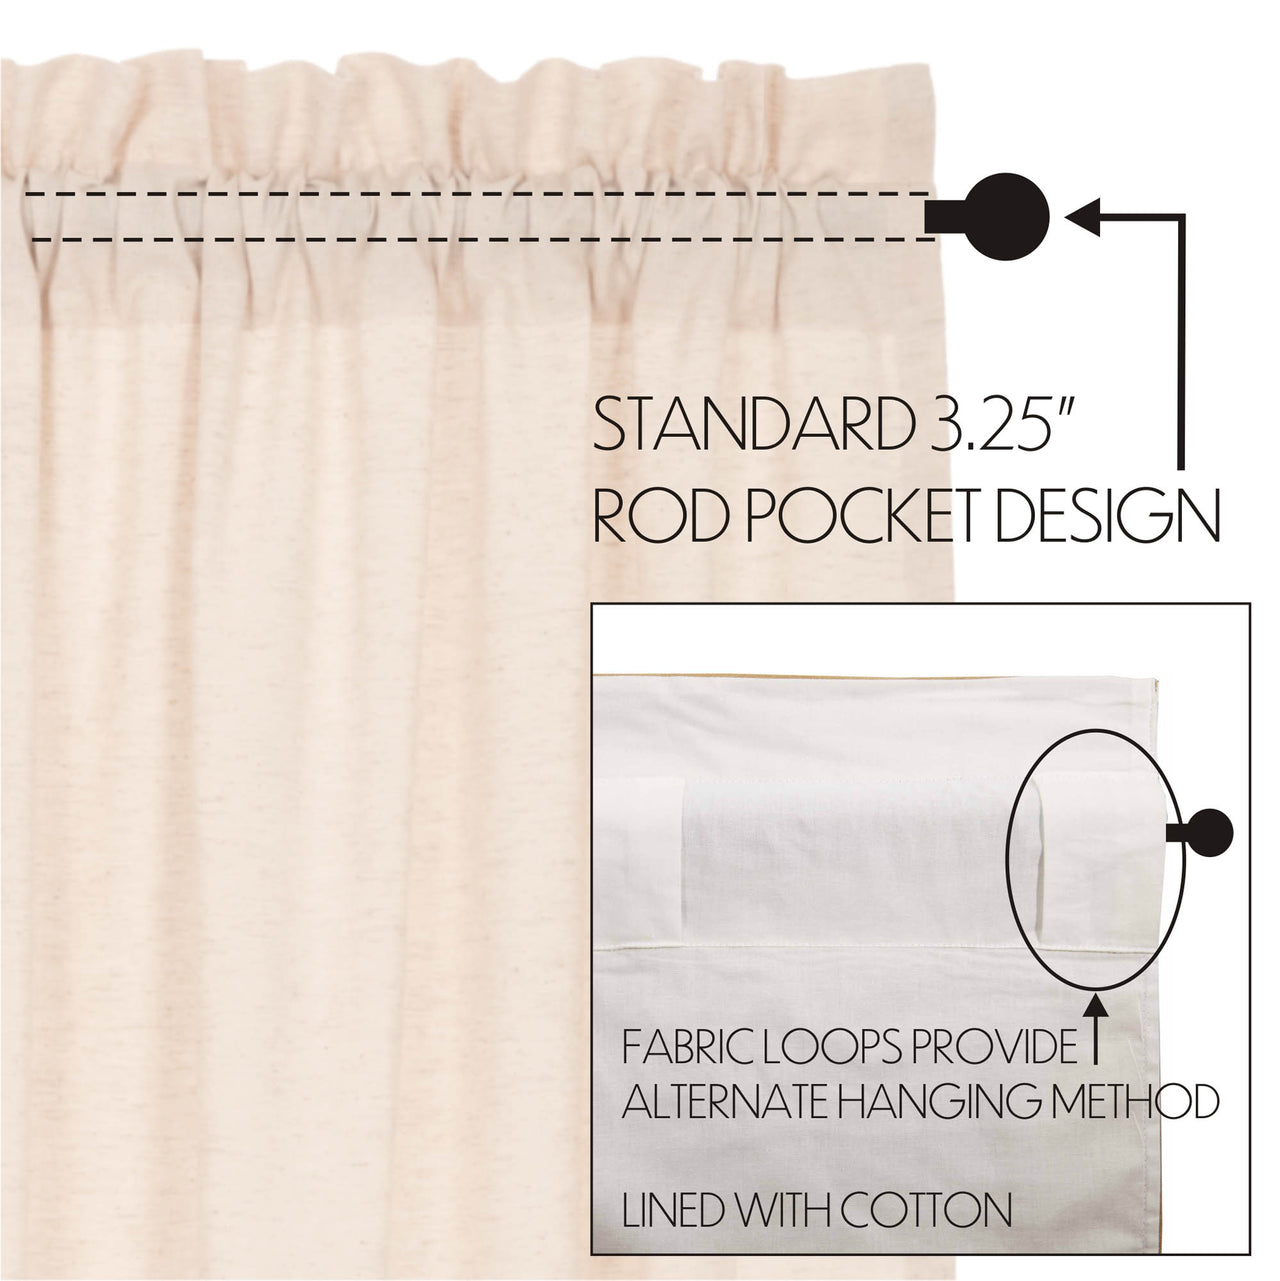 Simple Life Flax Natural Ruffled Short Panel Curtain Set of 2 63x36 VHC Brands